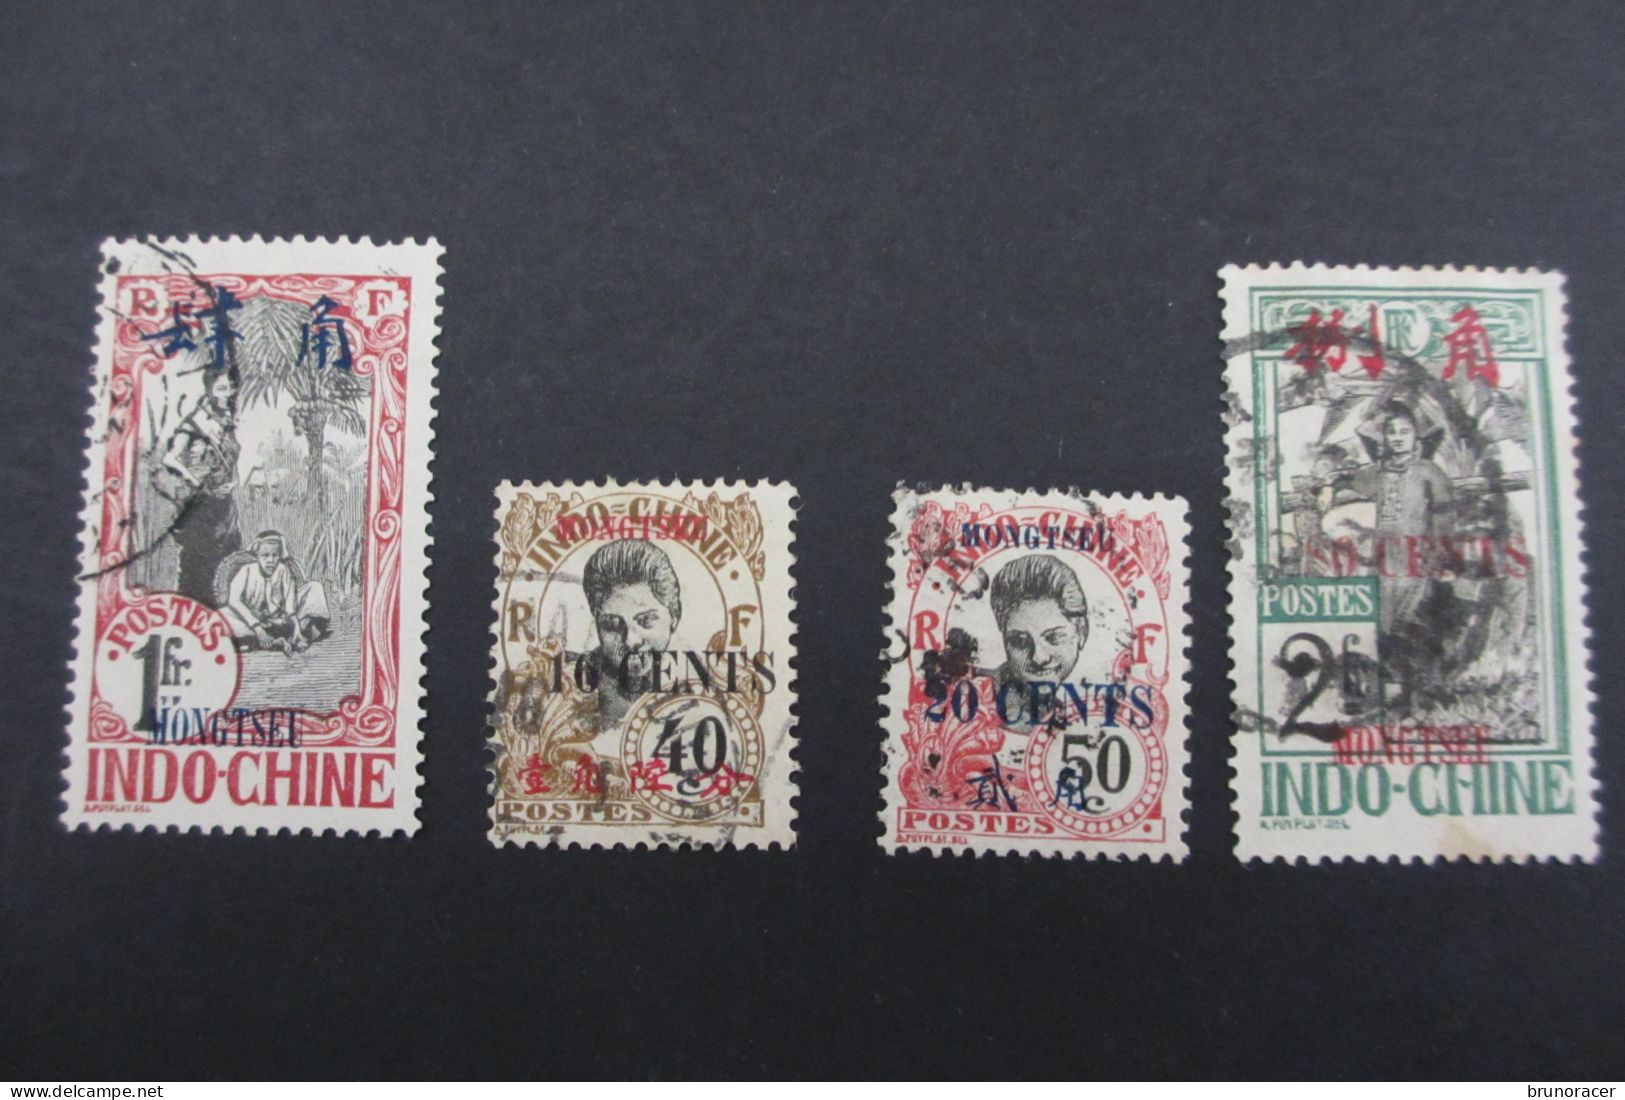 MONG-TZEU N°47/61/62/65 Oblit. TB COTE 49 EUROS VOIR SCANS - Used Stamps